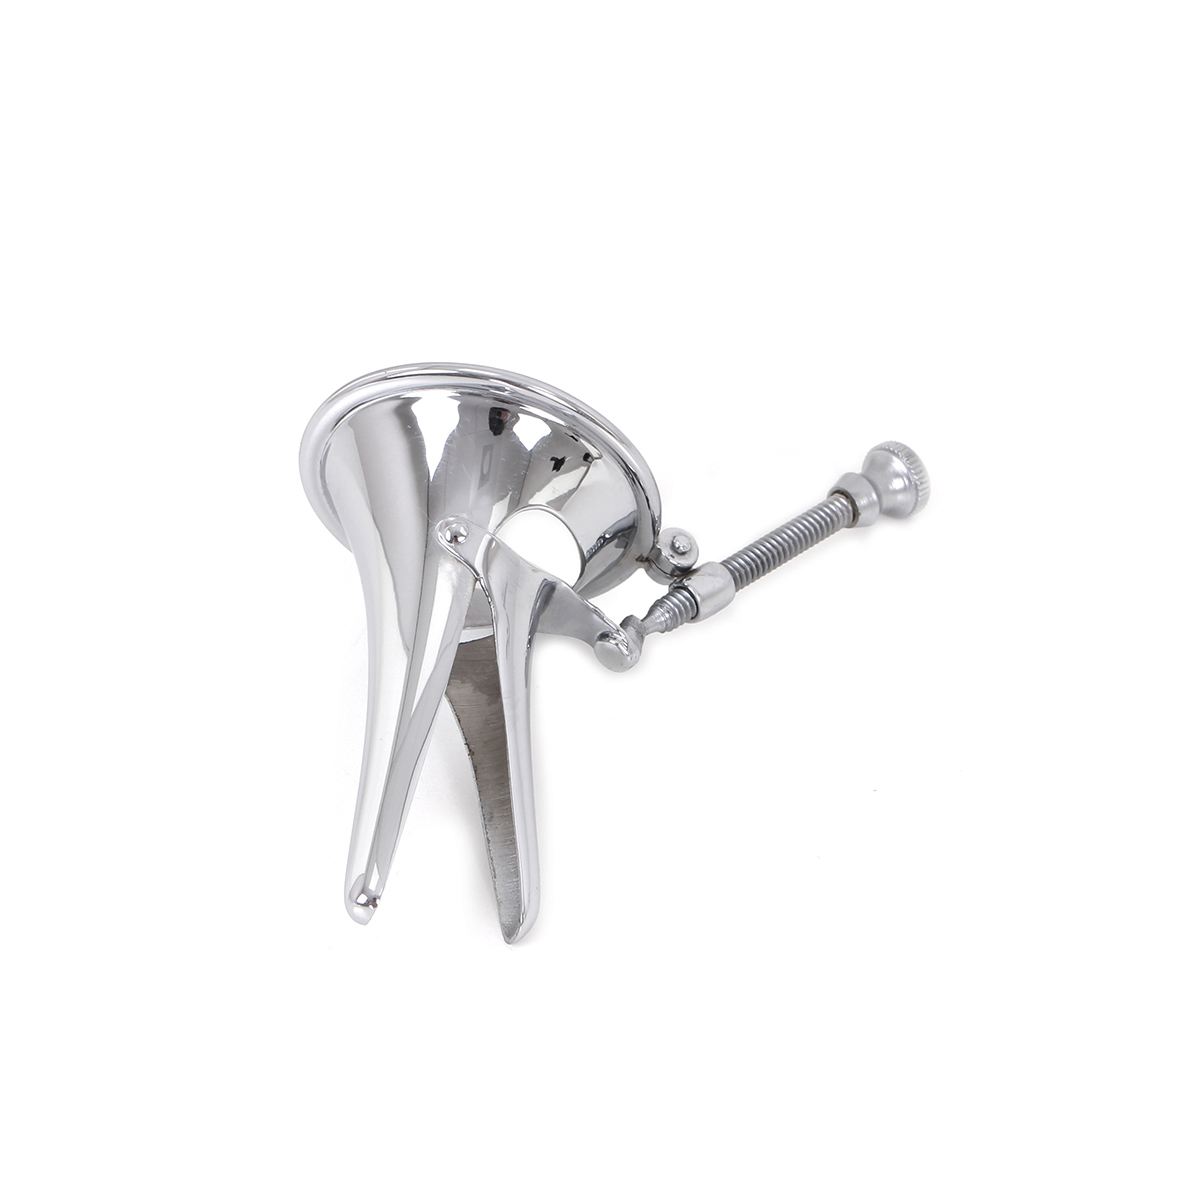 Collin-Small-Anal-Speculum-OPR-2960090-8